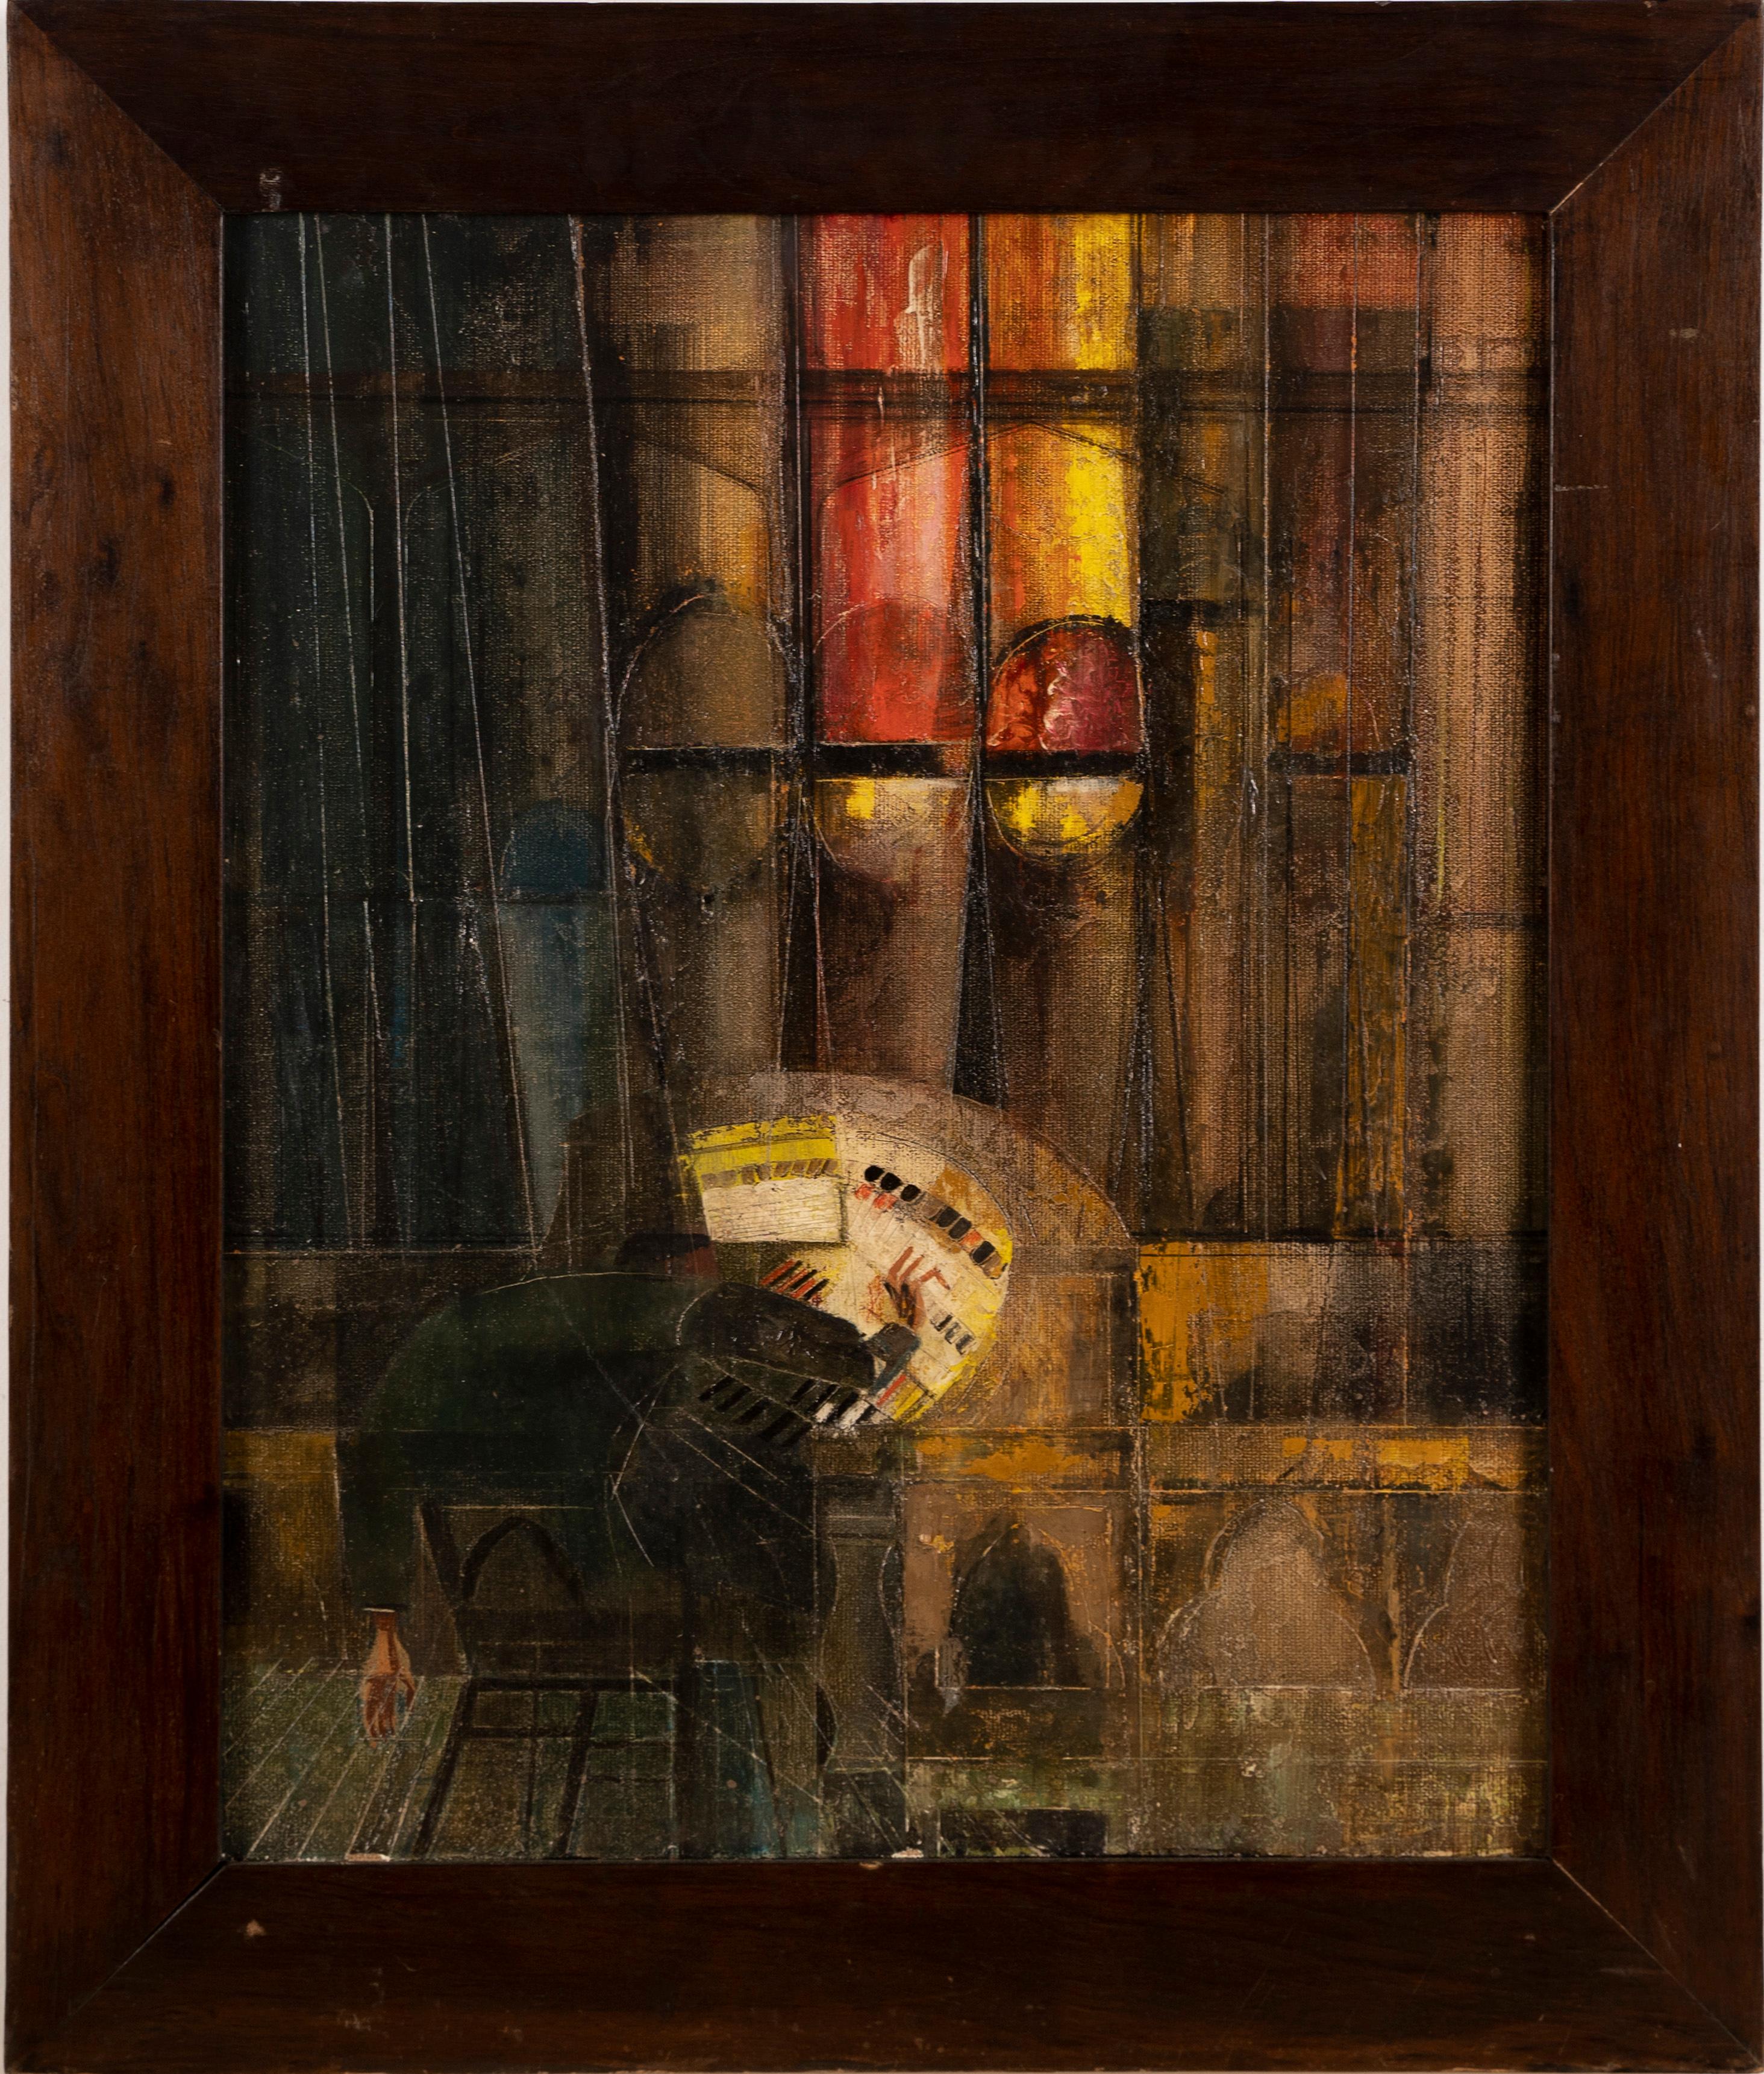 Unknown Abstract Painting - The Organ Player, American School Cubist Interior Abstract Original Oil Painting